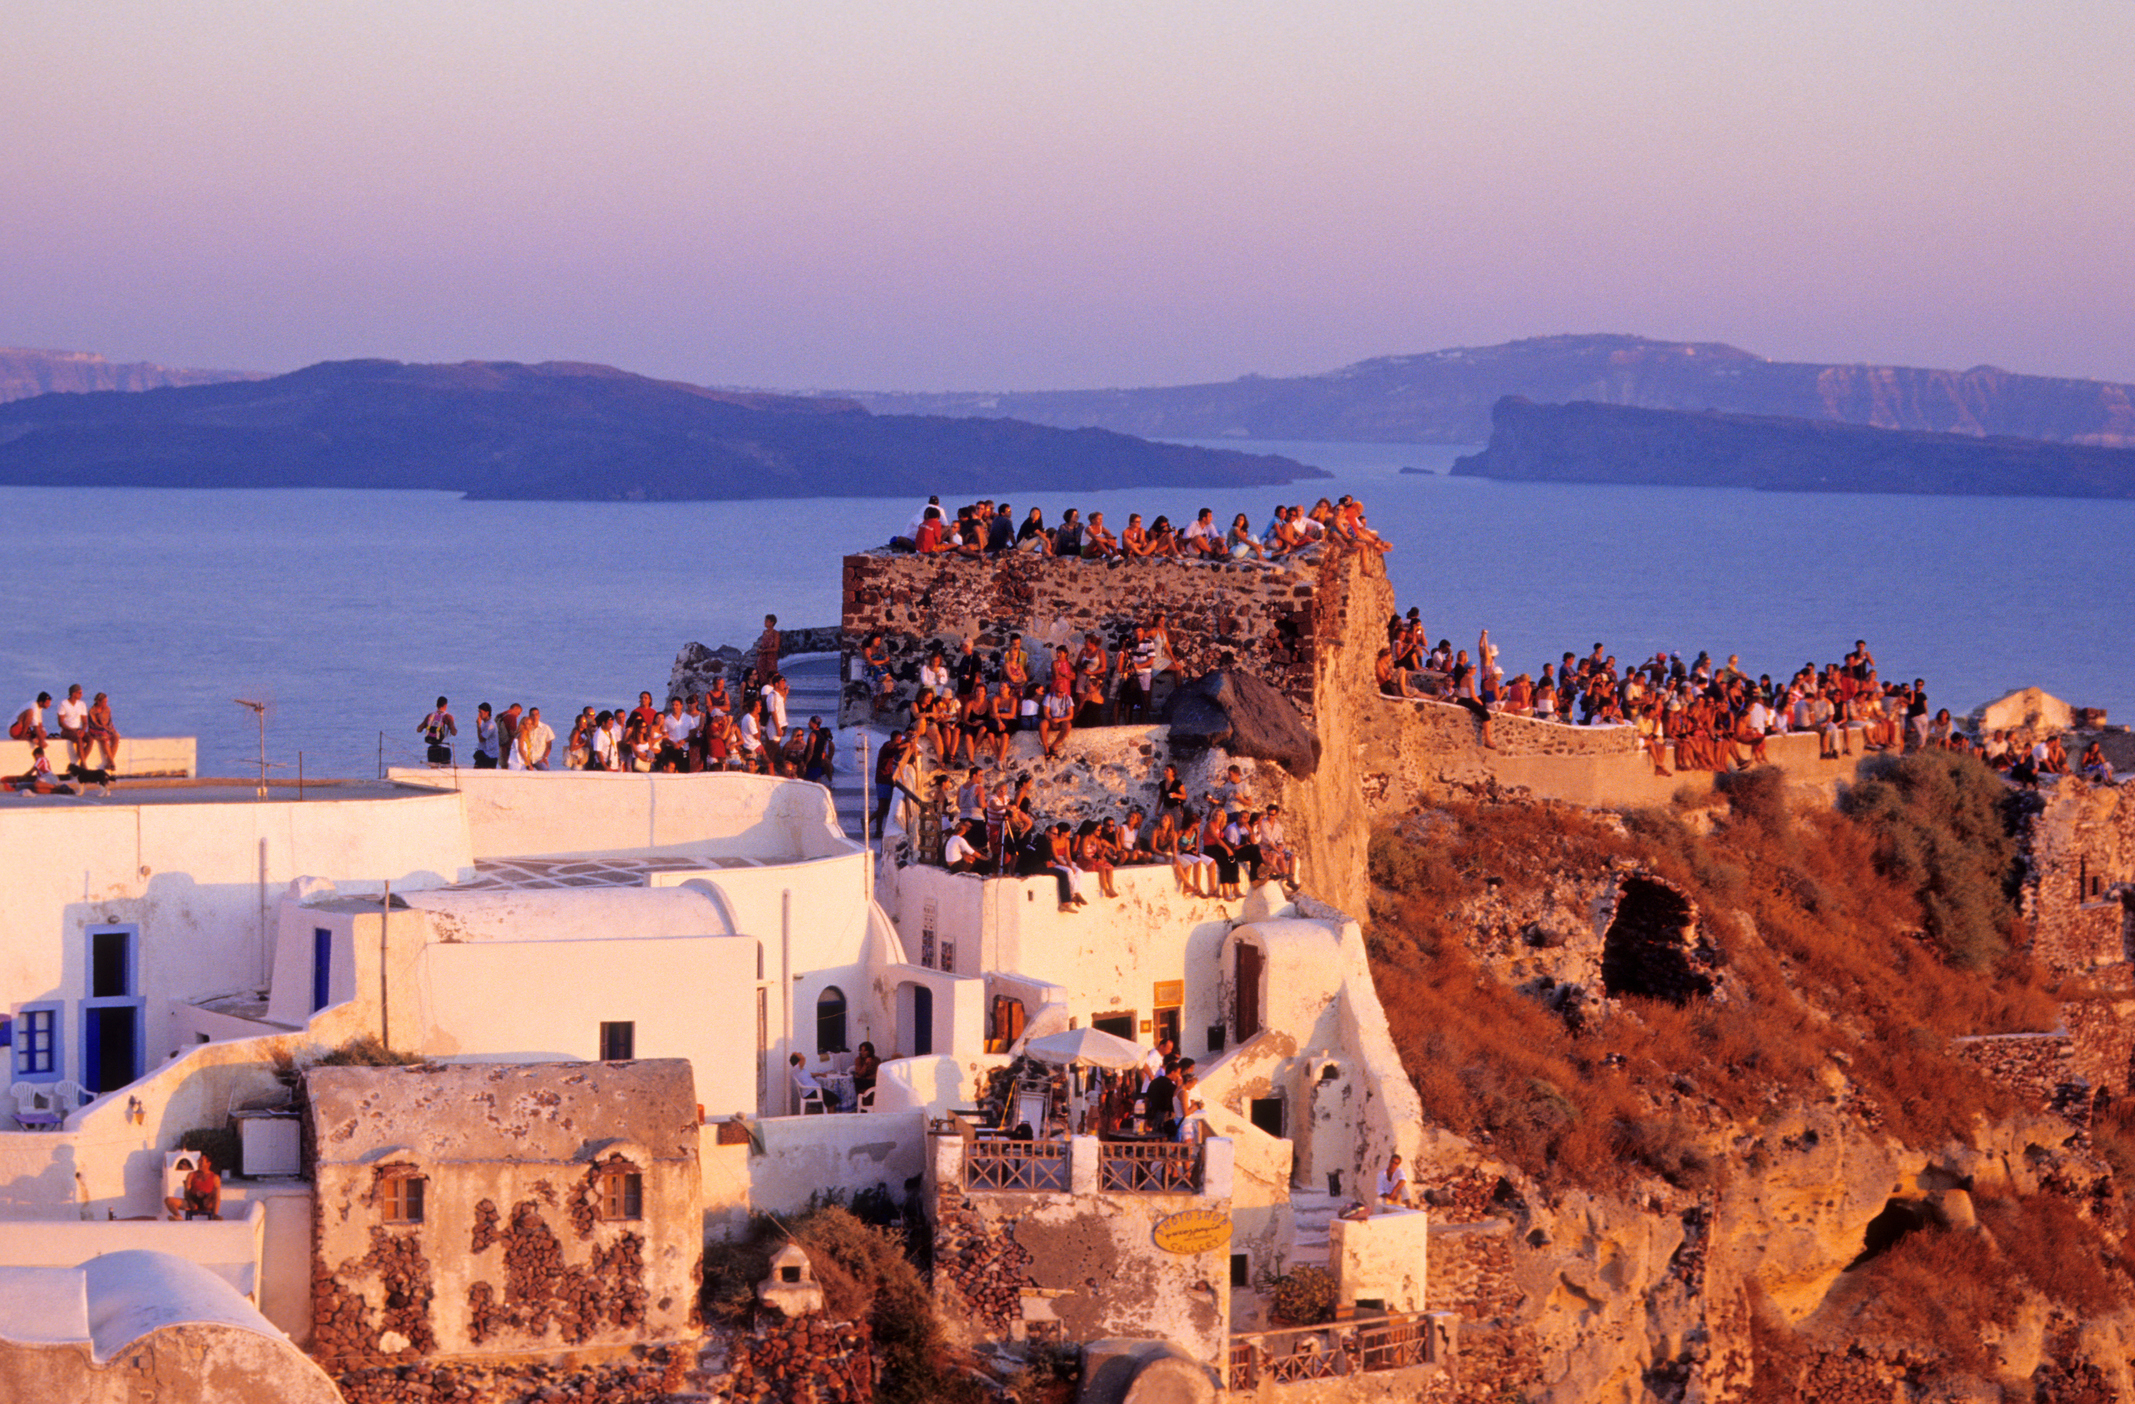 A crowd of people in Santorini watching the sunset